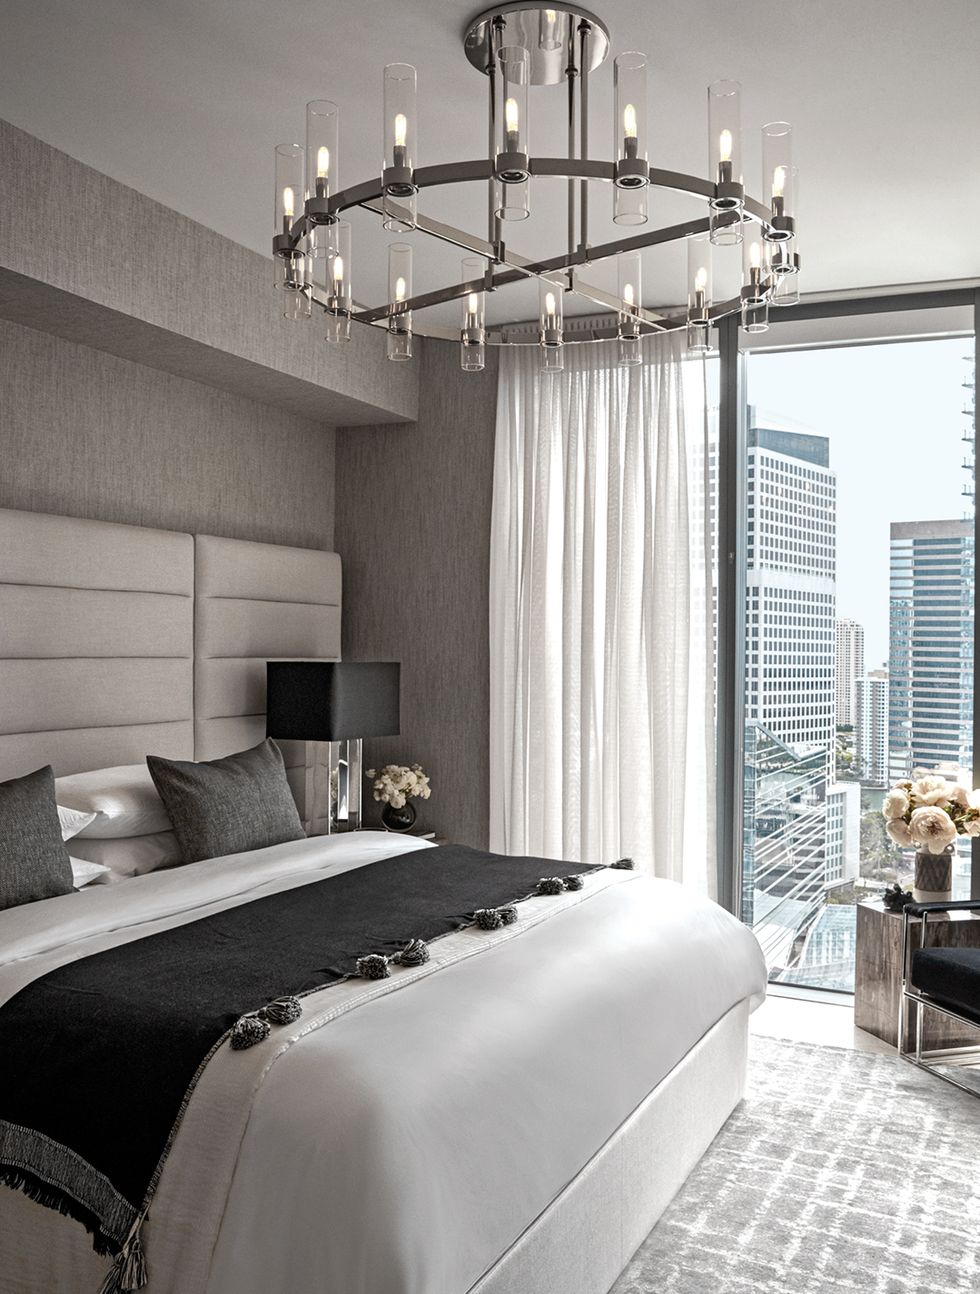 The master bedroom’s headboard, bedding, chandelier, table lamp, and rug are all by RH, Restoration Hardware. The wallcovering is by Phillip Jeffries.